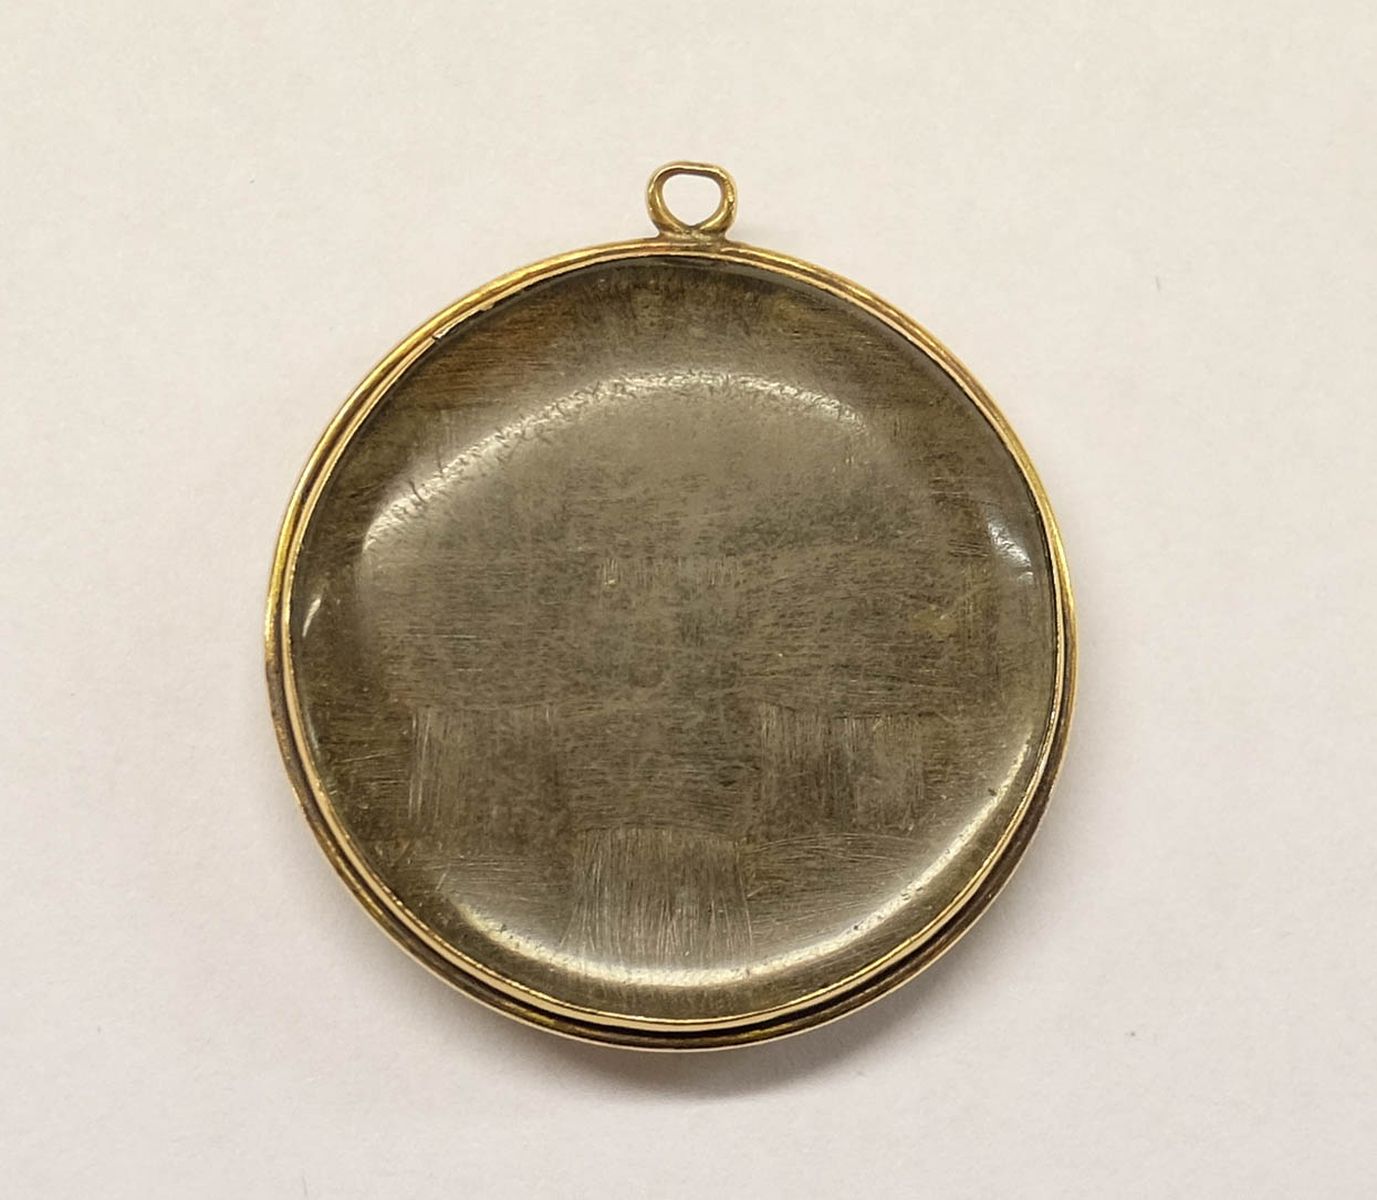 * Hair Jewellery - Charles X (1757-1836, King of France). A small circular pendant, c.1800, - Image 2 of 3